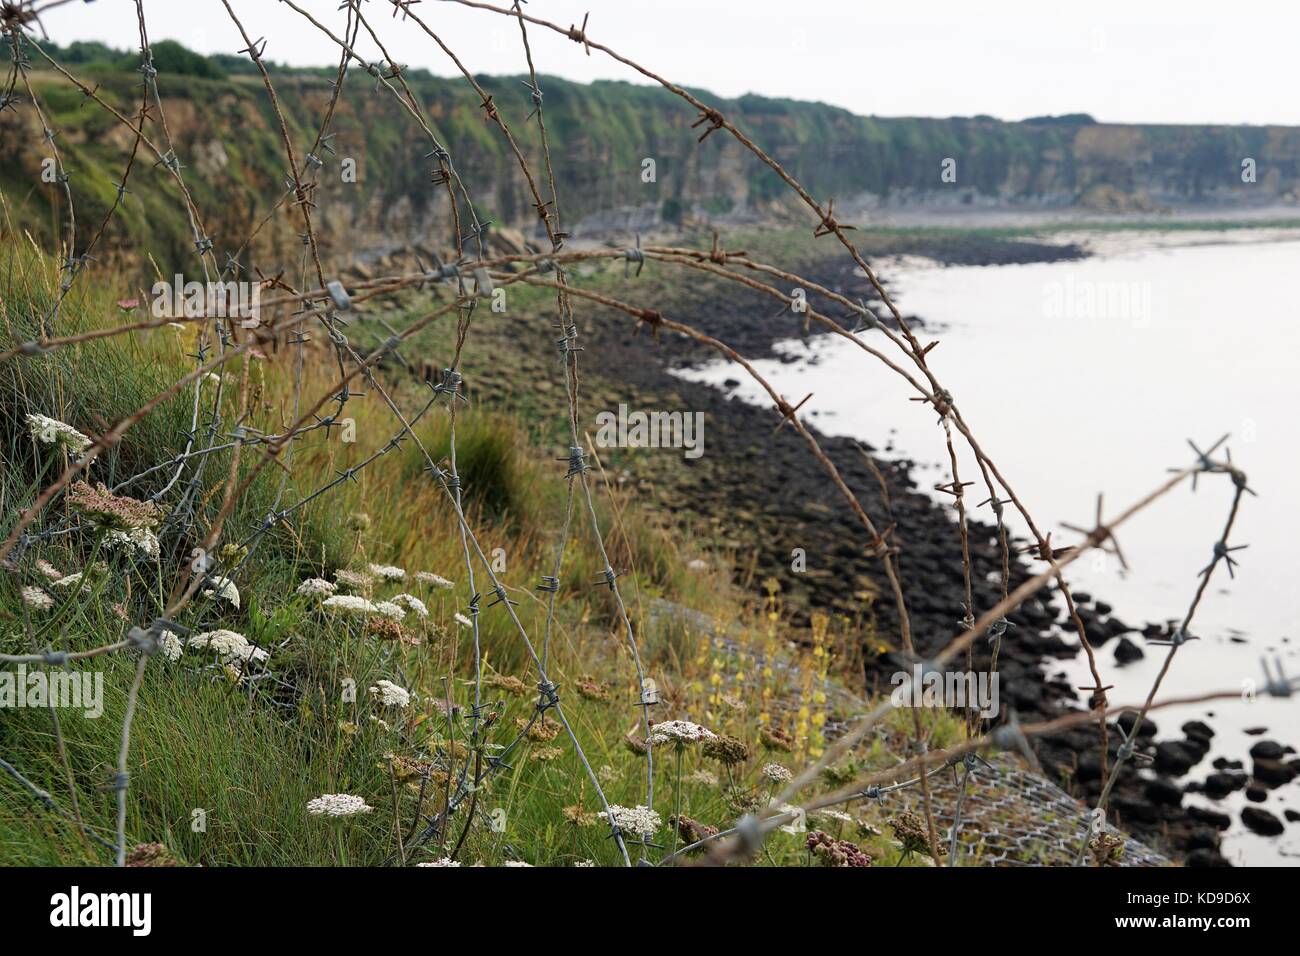 Normandy landings beach - coastline/cliffs with barbed wire Stock Photo